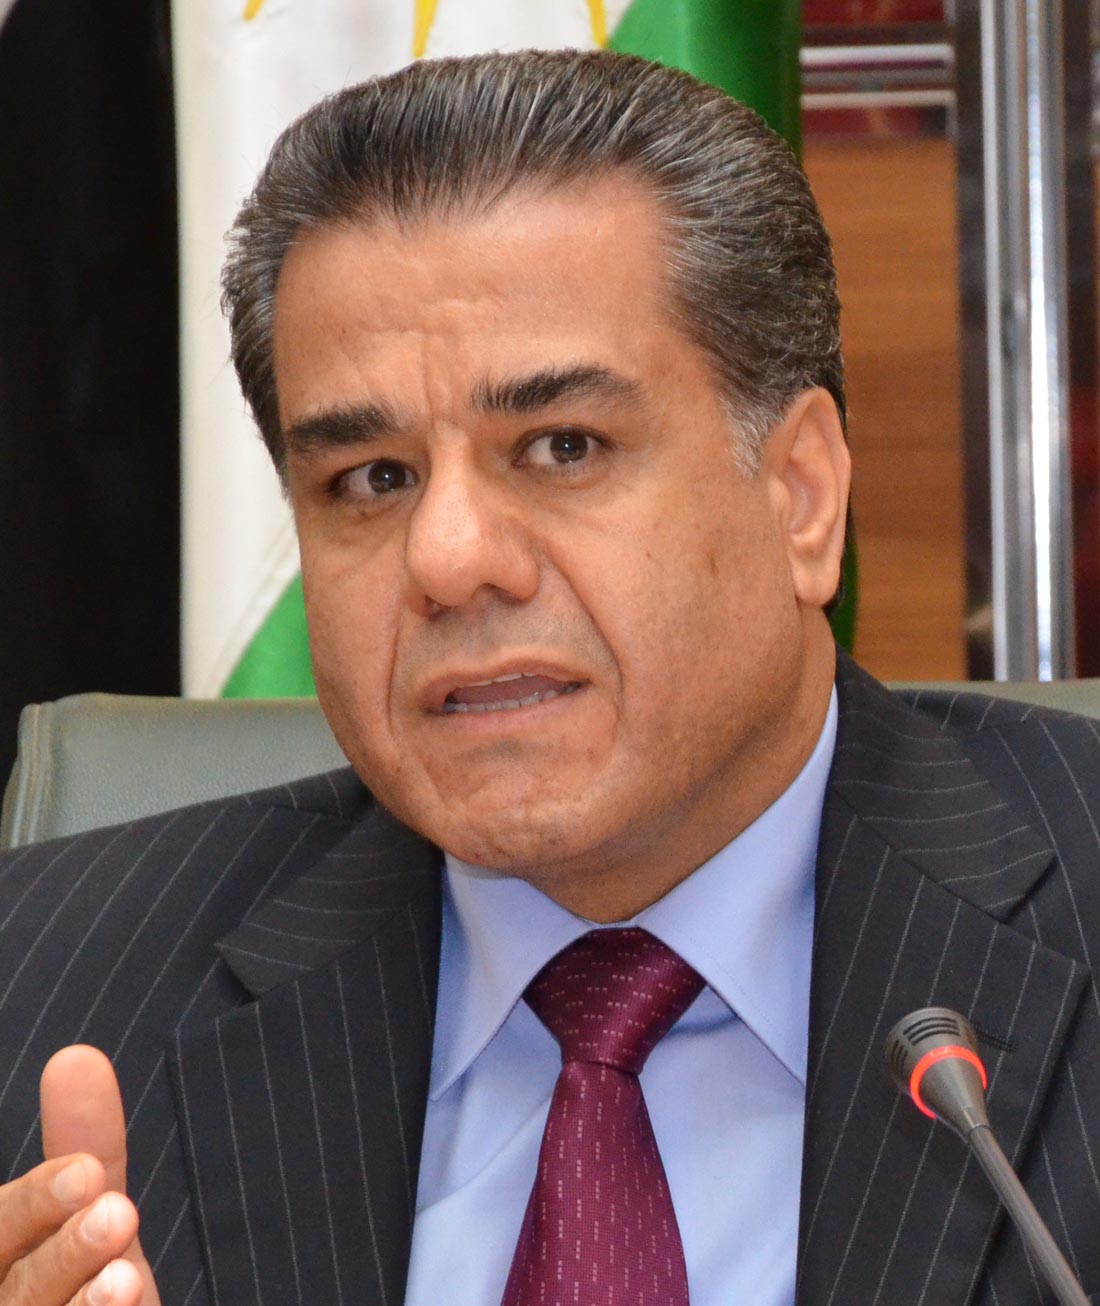 Falah Mustafa, head of the Foreign Relations Department